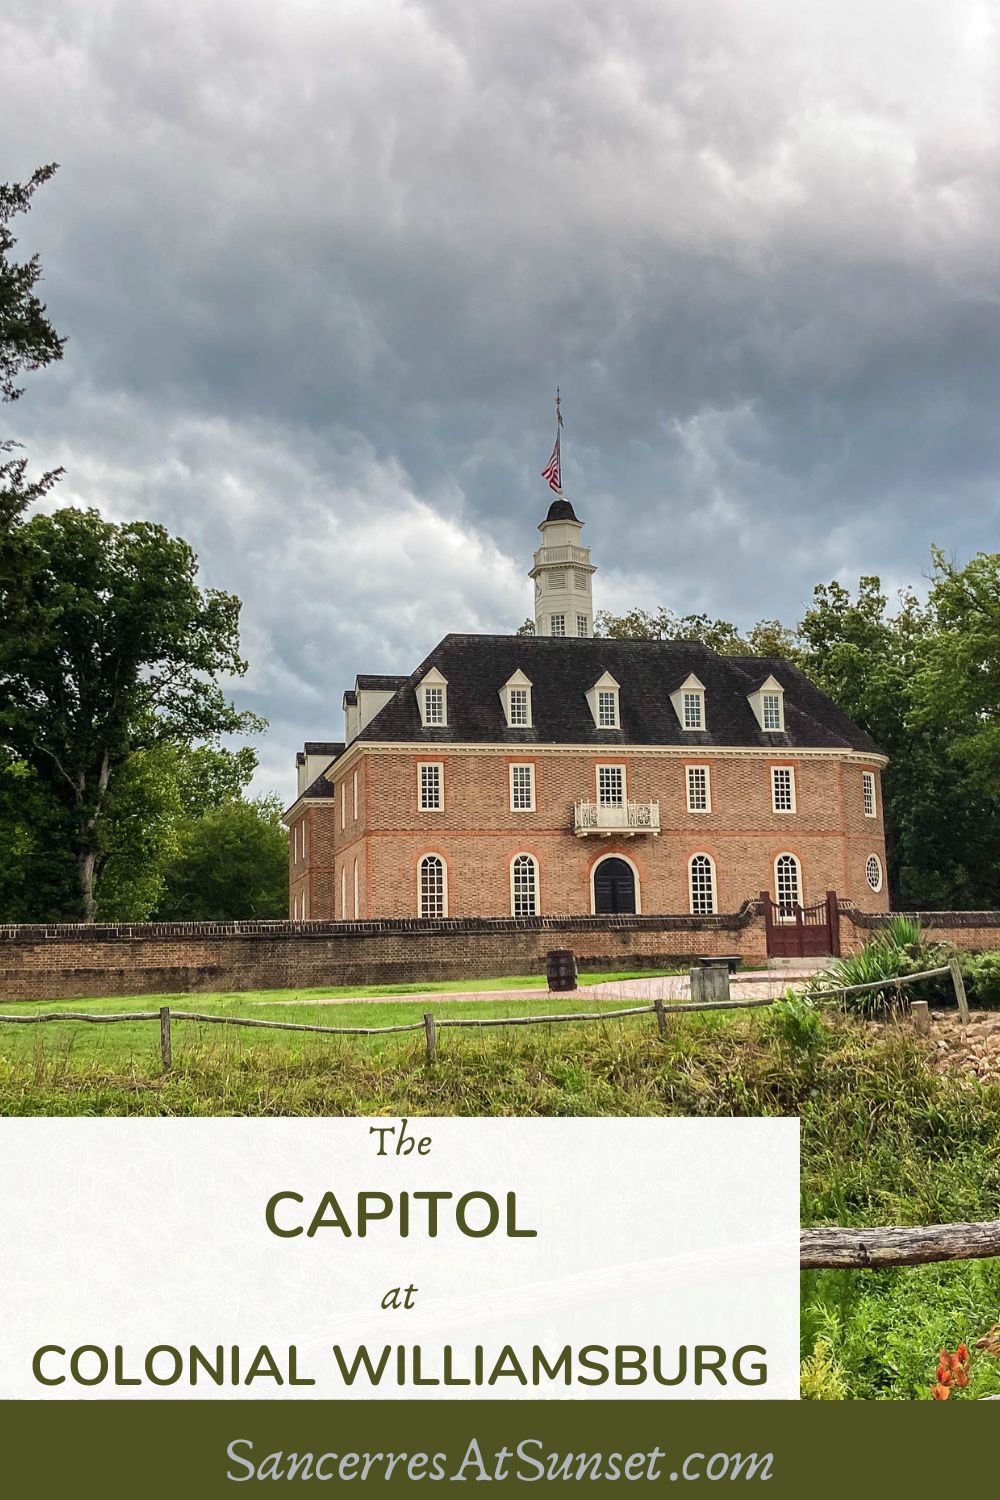 The Capitol at Colonial Williamsburg